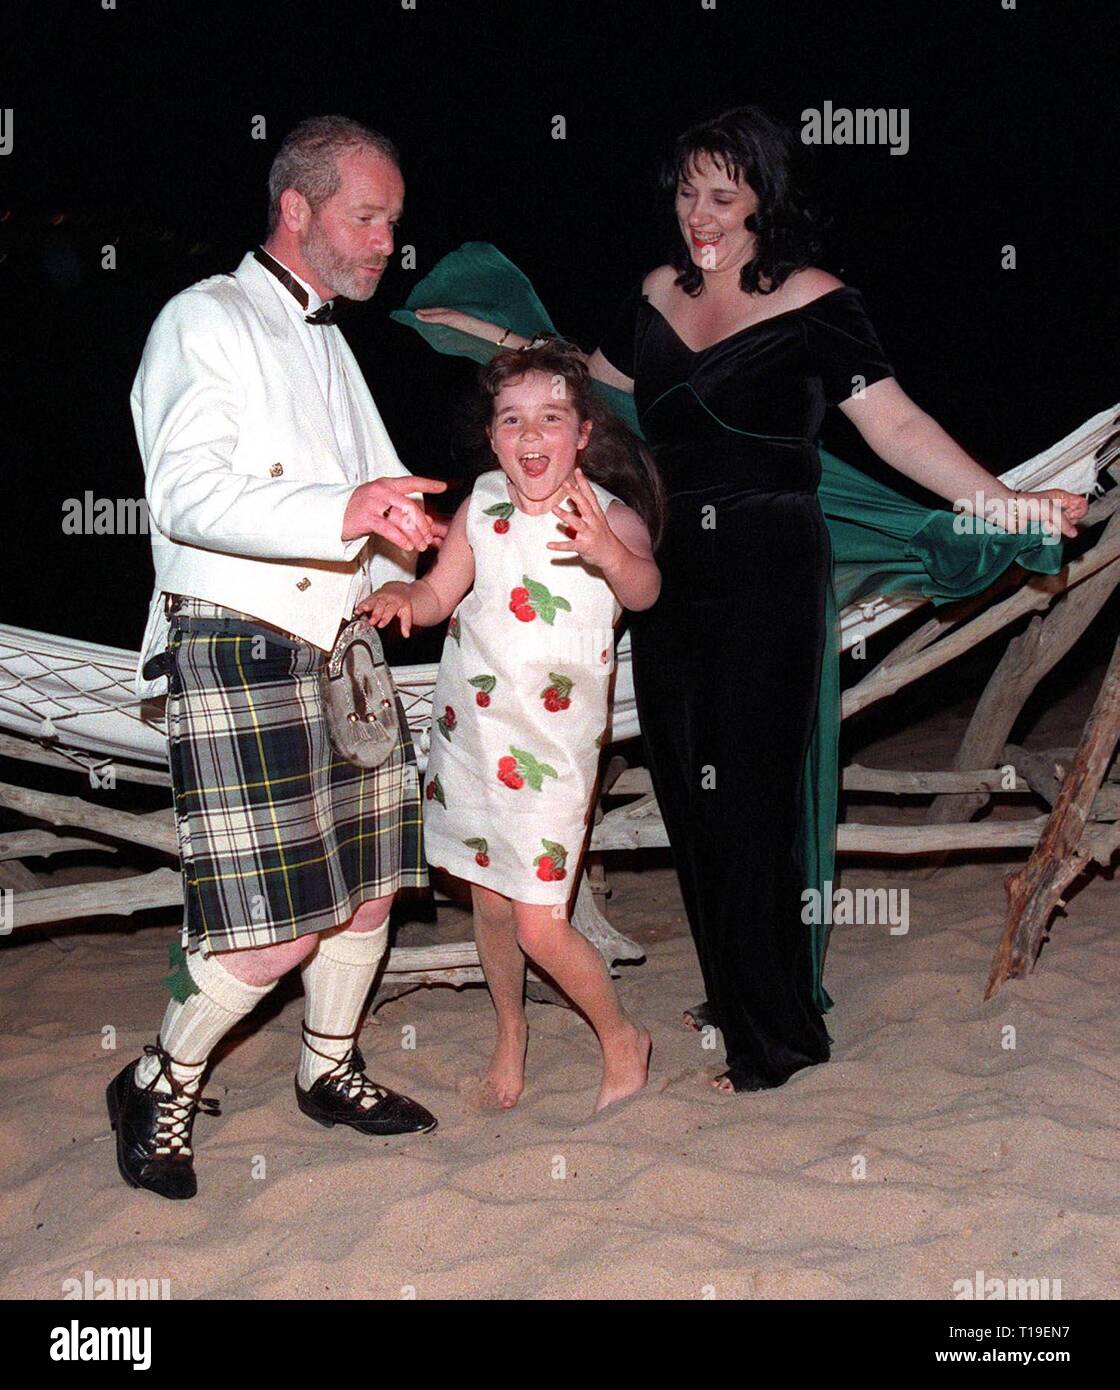 CANNES, FRANCE - May 24, 1998:  Cannes Best Actor winner PETER MULLAN celebrates his award on the beach with his wife ANNIE & daughter MAIRI (age 7). Stock Photo